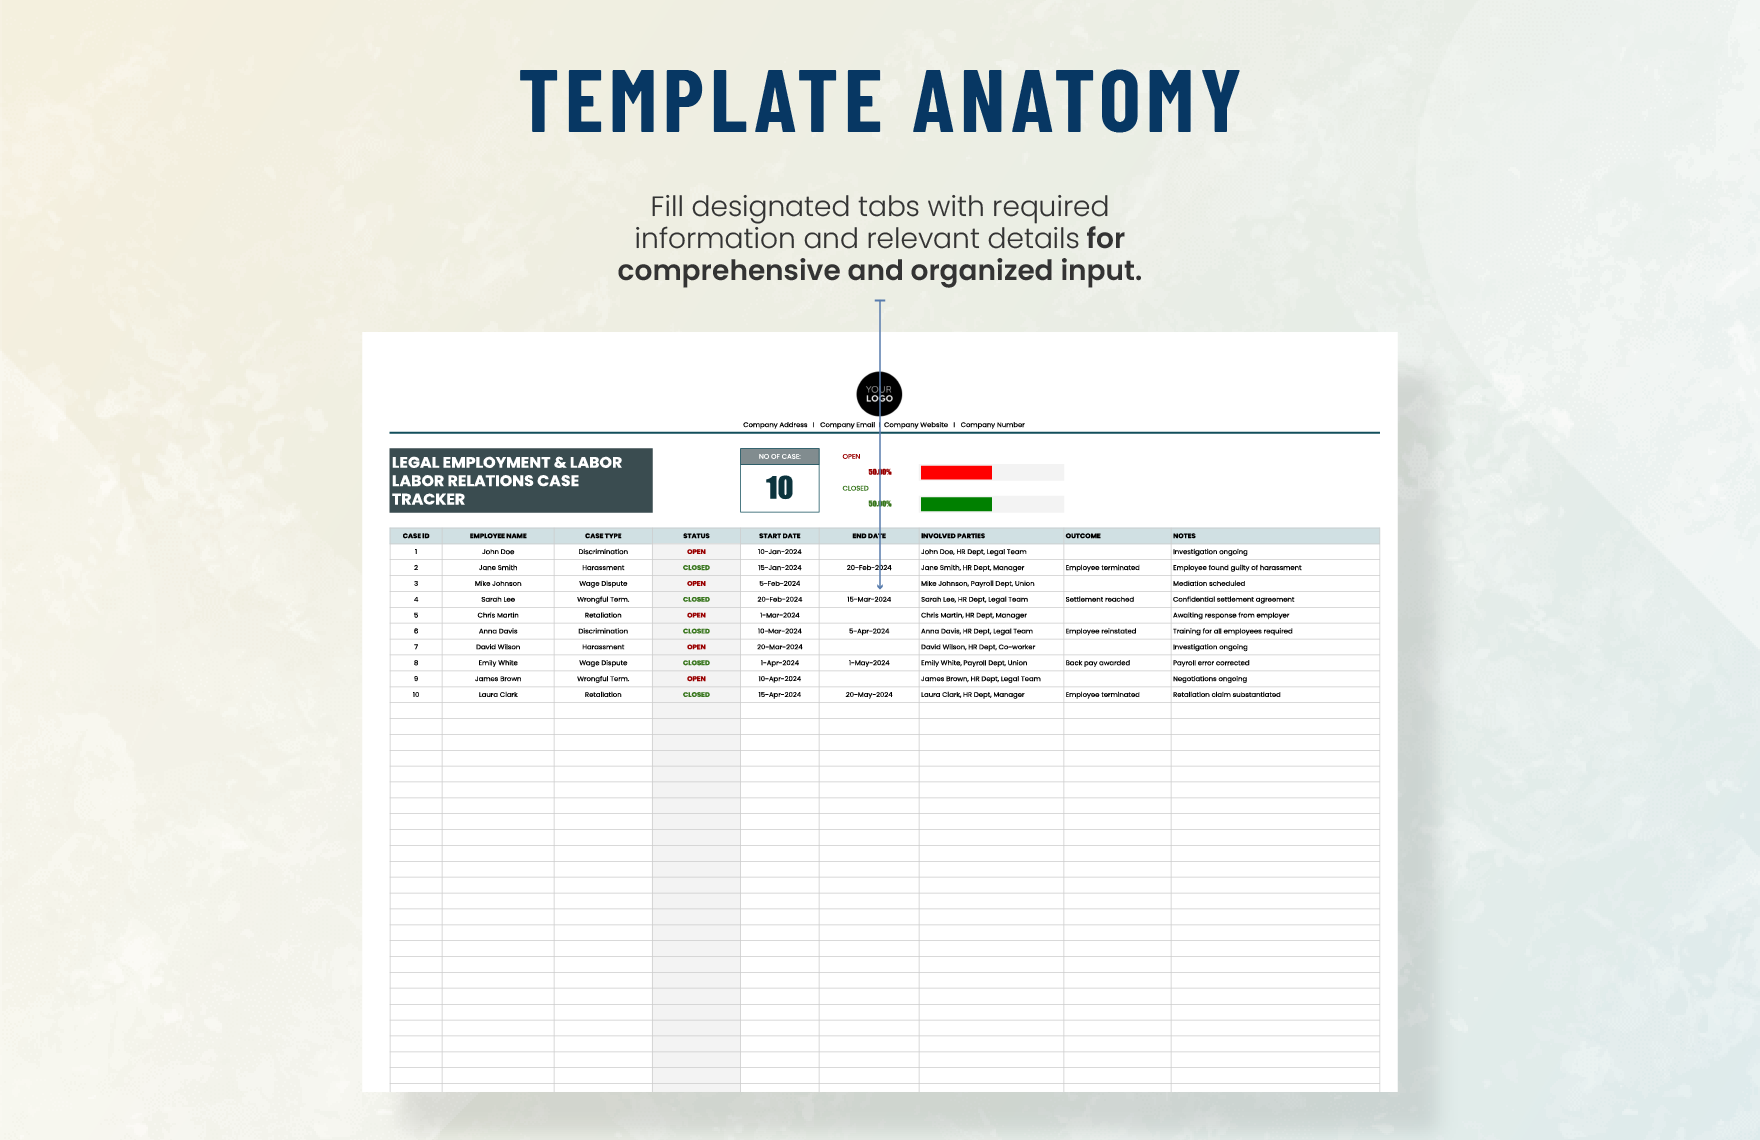 Legal Employment & Labor Labor Relations Case Tracker Template